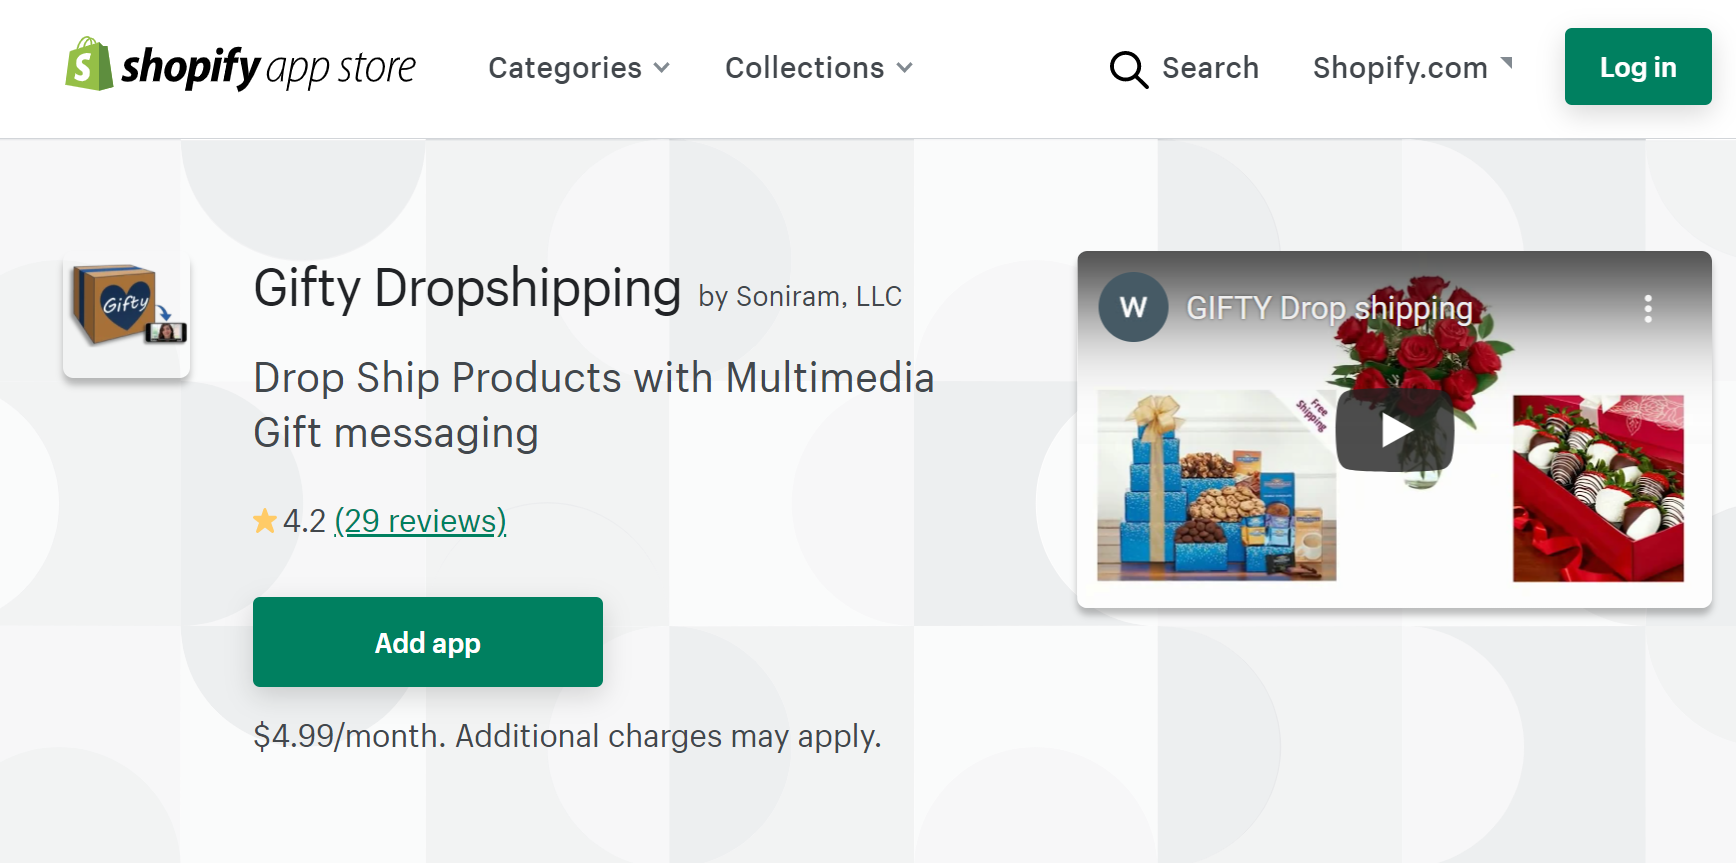 Gifty Dropshipping